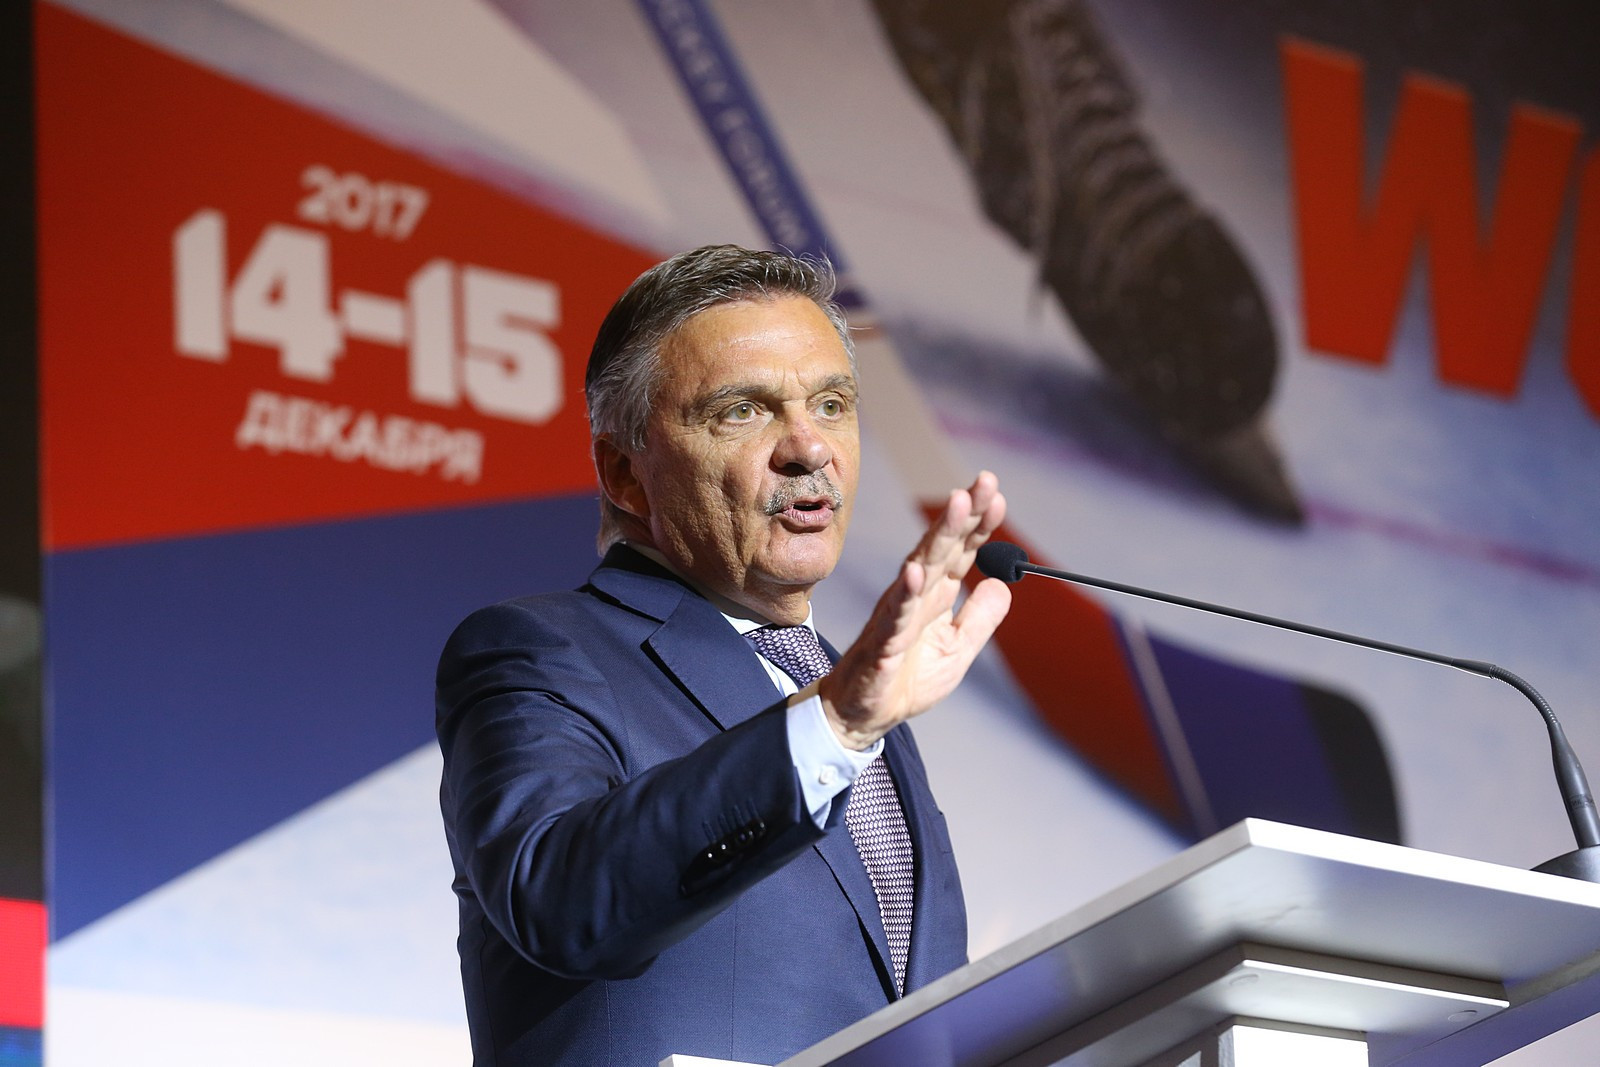 IIHF President René Fasel has revealed that a decision on whether Russia's women's ice hockey team can play at Pyeongchang 2018 after six of the team from Sochi 2014 were disqualified is due next week ©RIHF